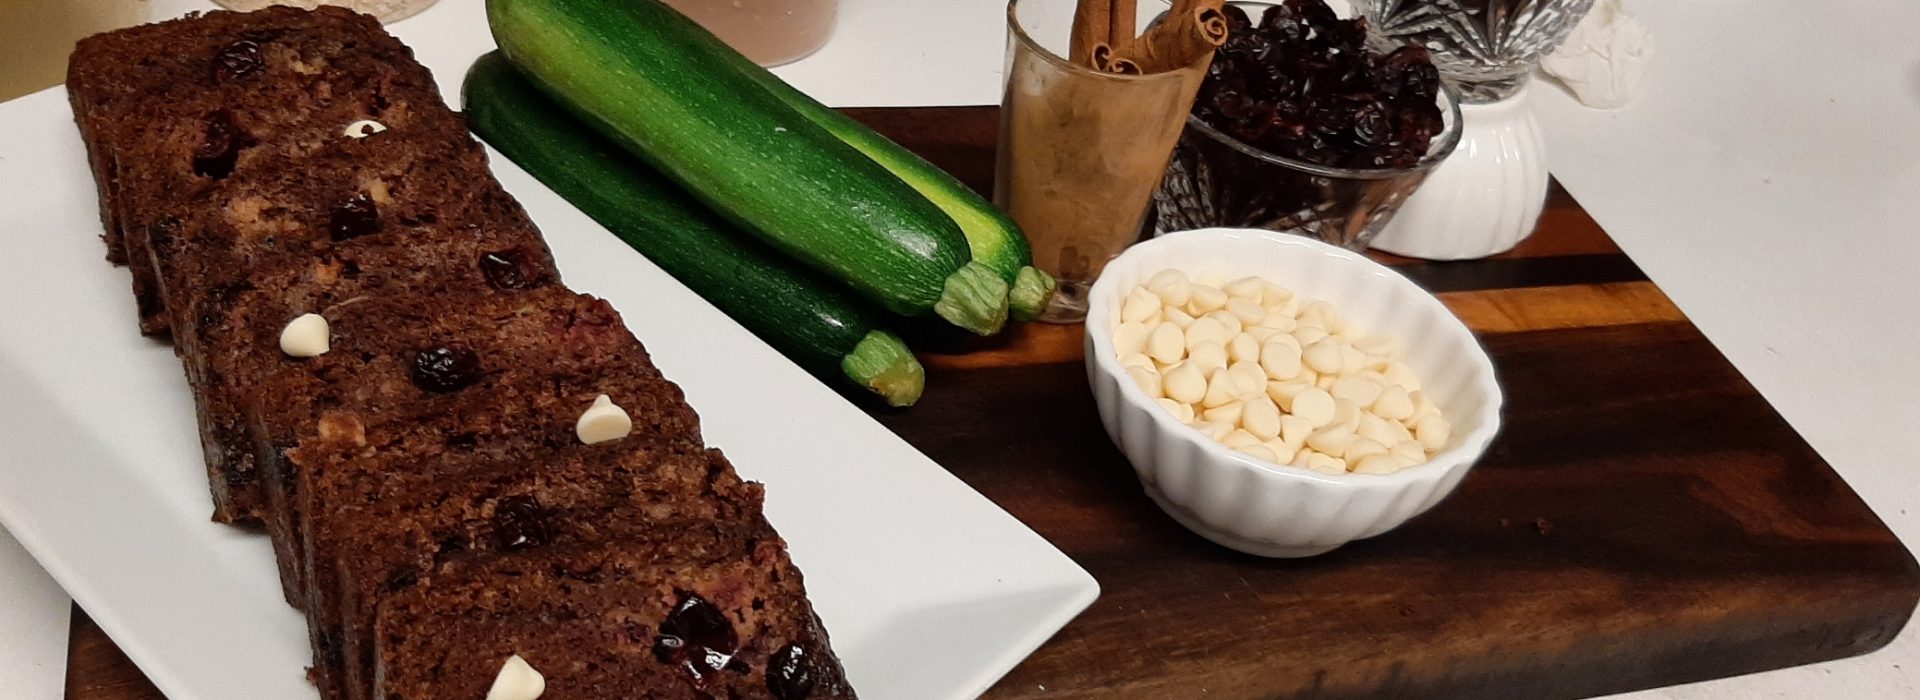 sliced chocolate zucchini cake next to bowls of ingredients